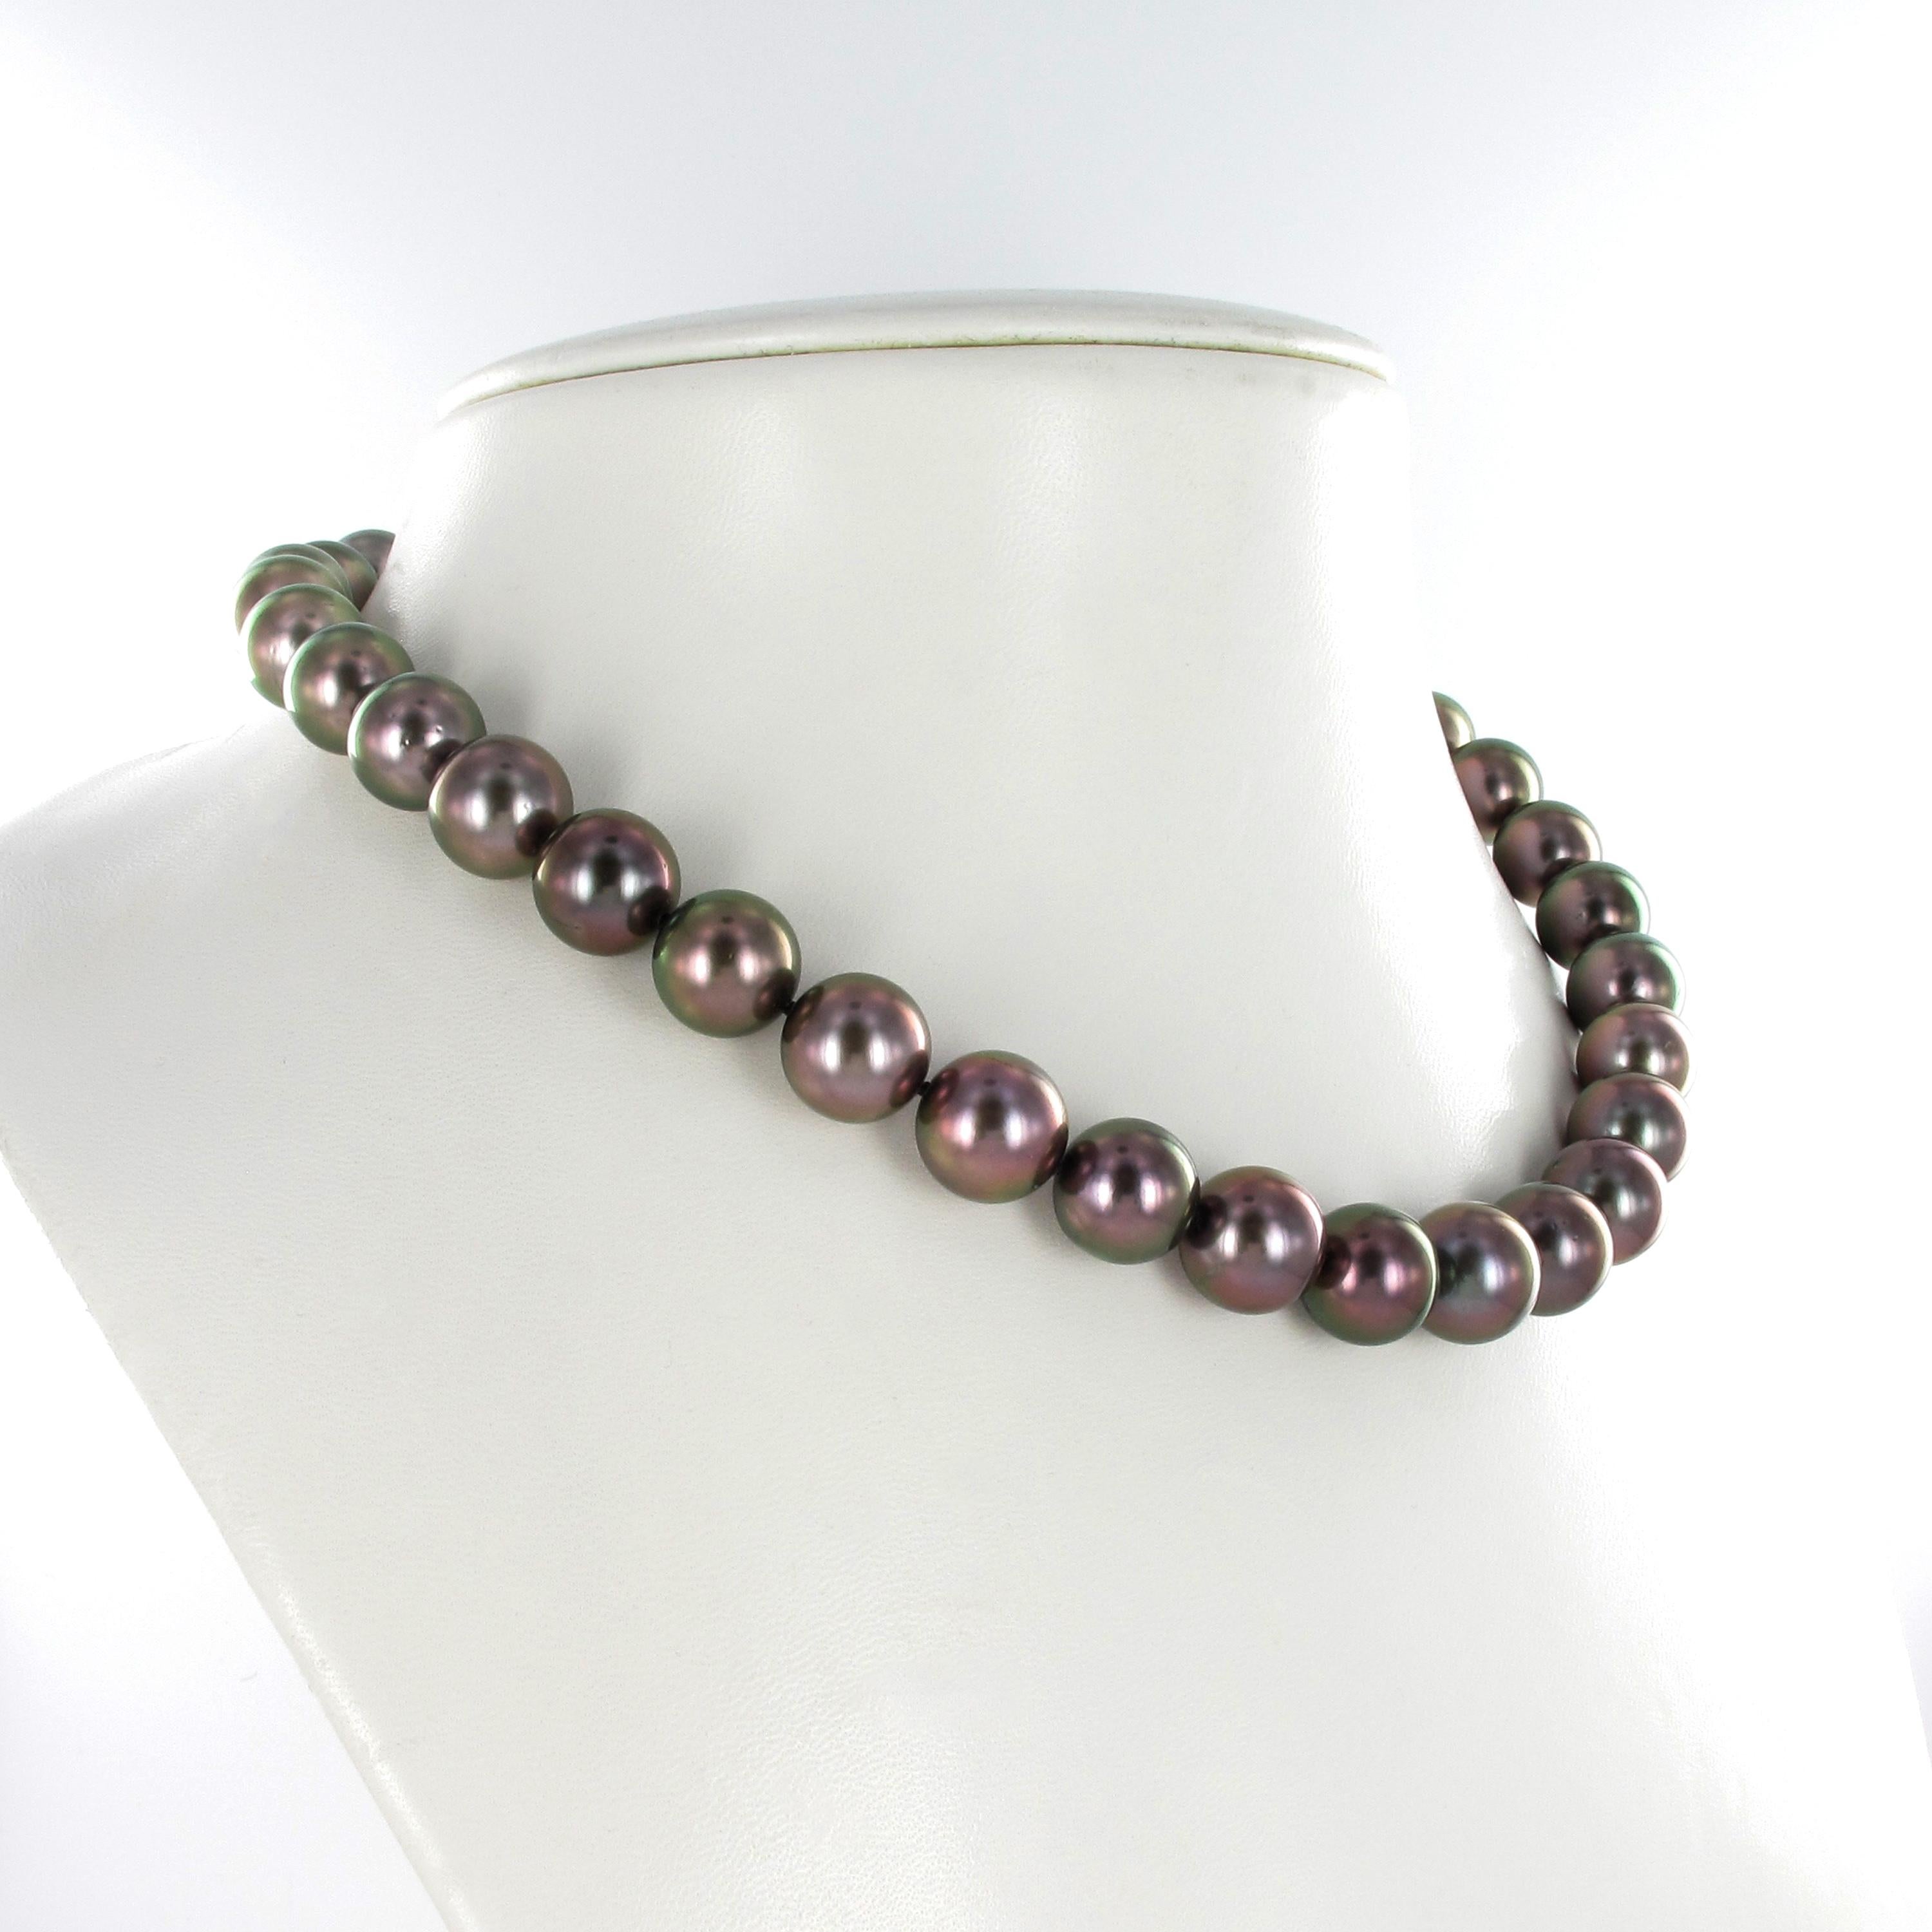 This strand consists of 35 round Tahitian cultured pearls graduating from 11.3 mm to 11.9 mm. Color range from soft gray to dark purple. Slightly spotted surface and with a very good luster. The ball clasp in 18 karat yellow gold is set with 12